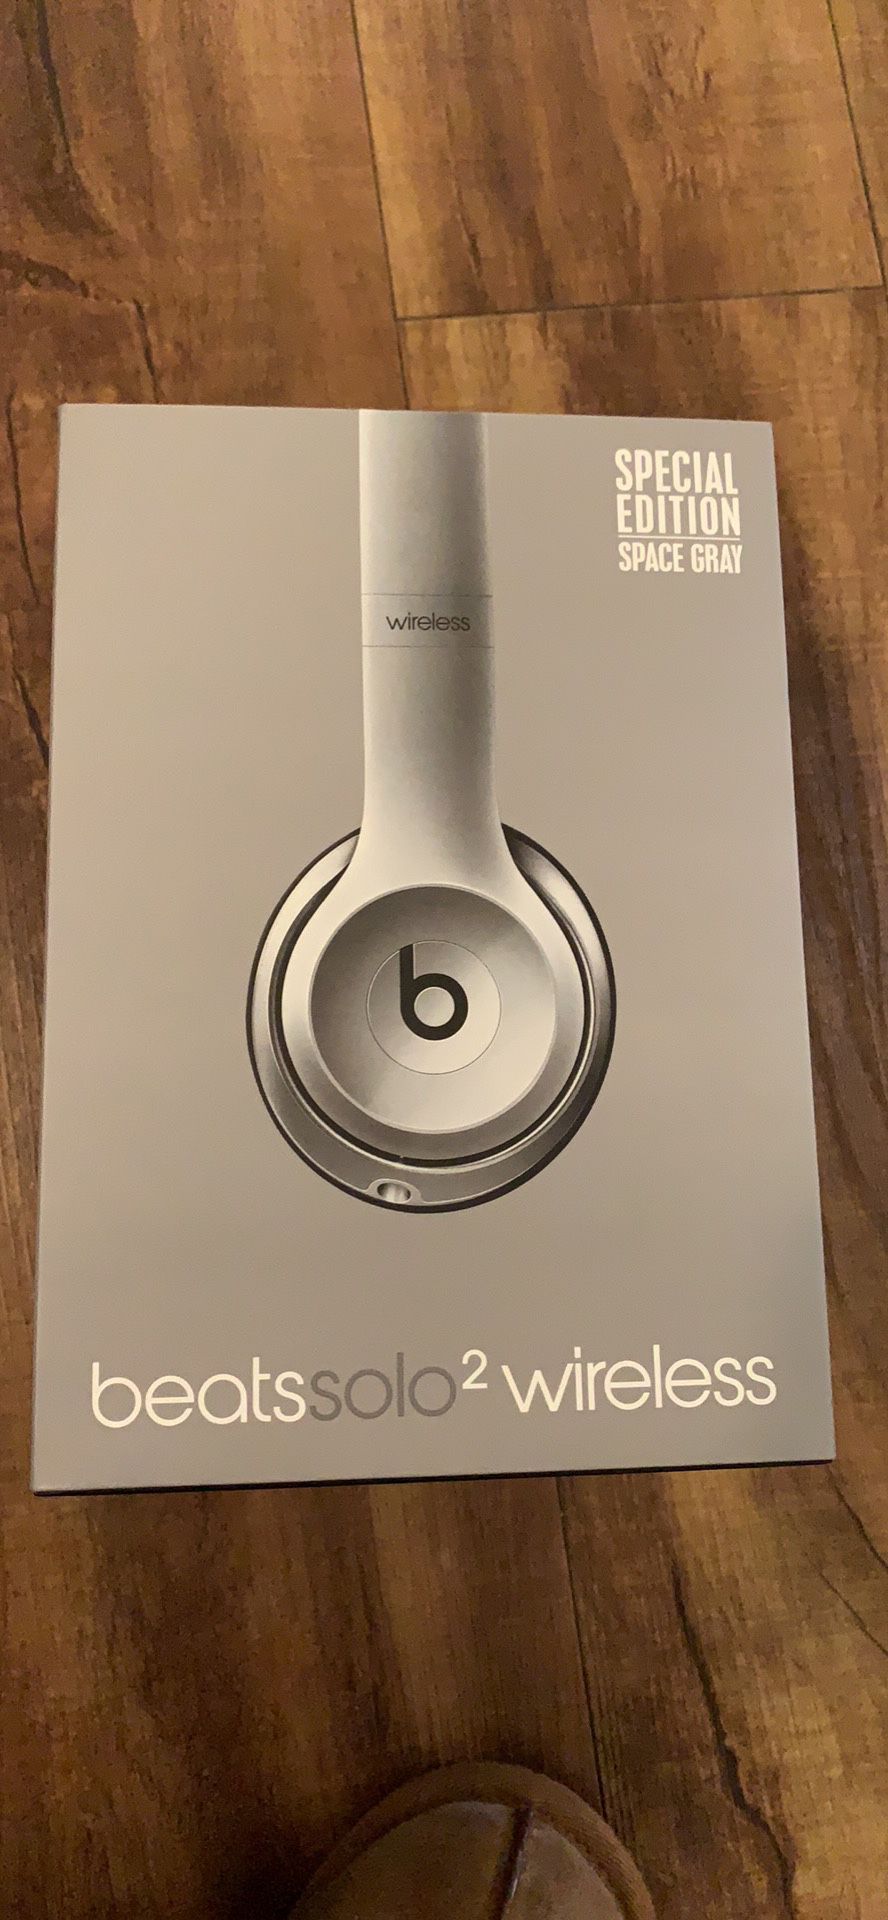 Beats solo wireless 2 headphones special edition space grey